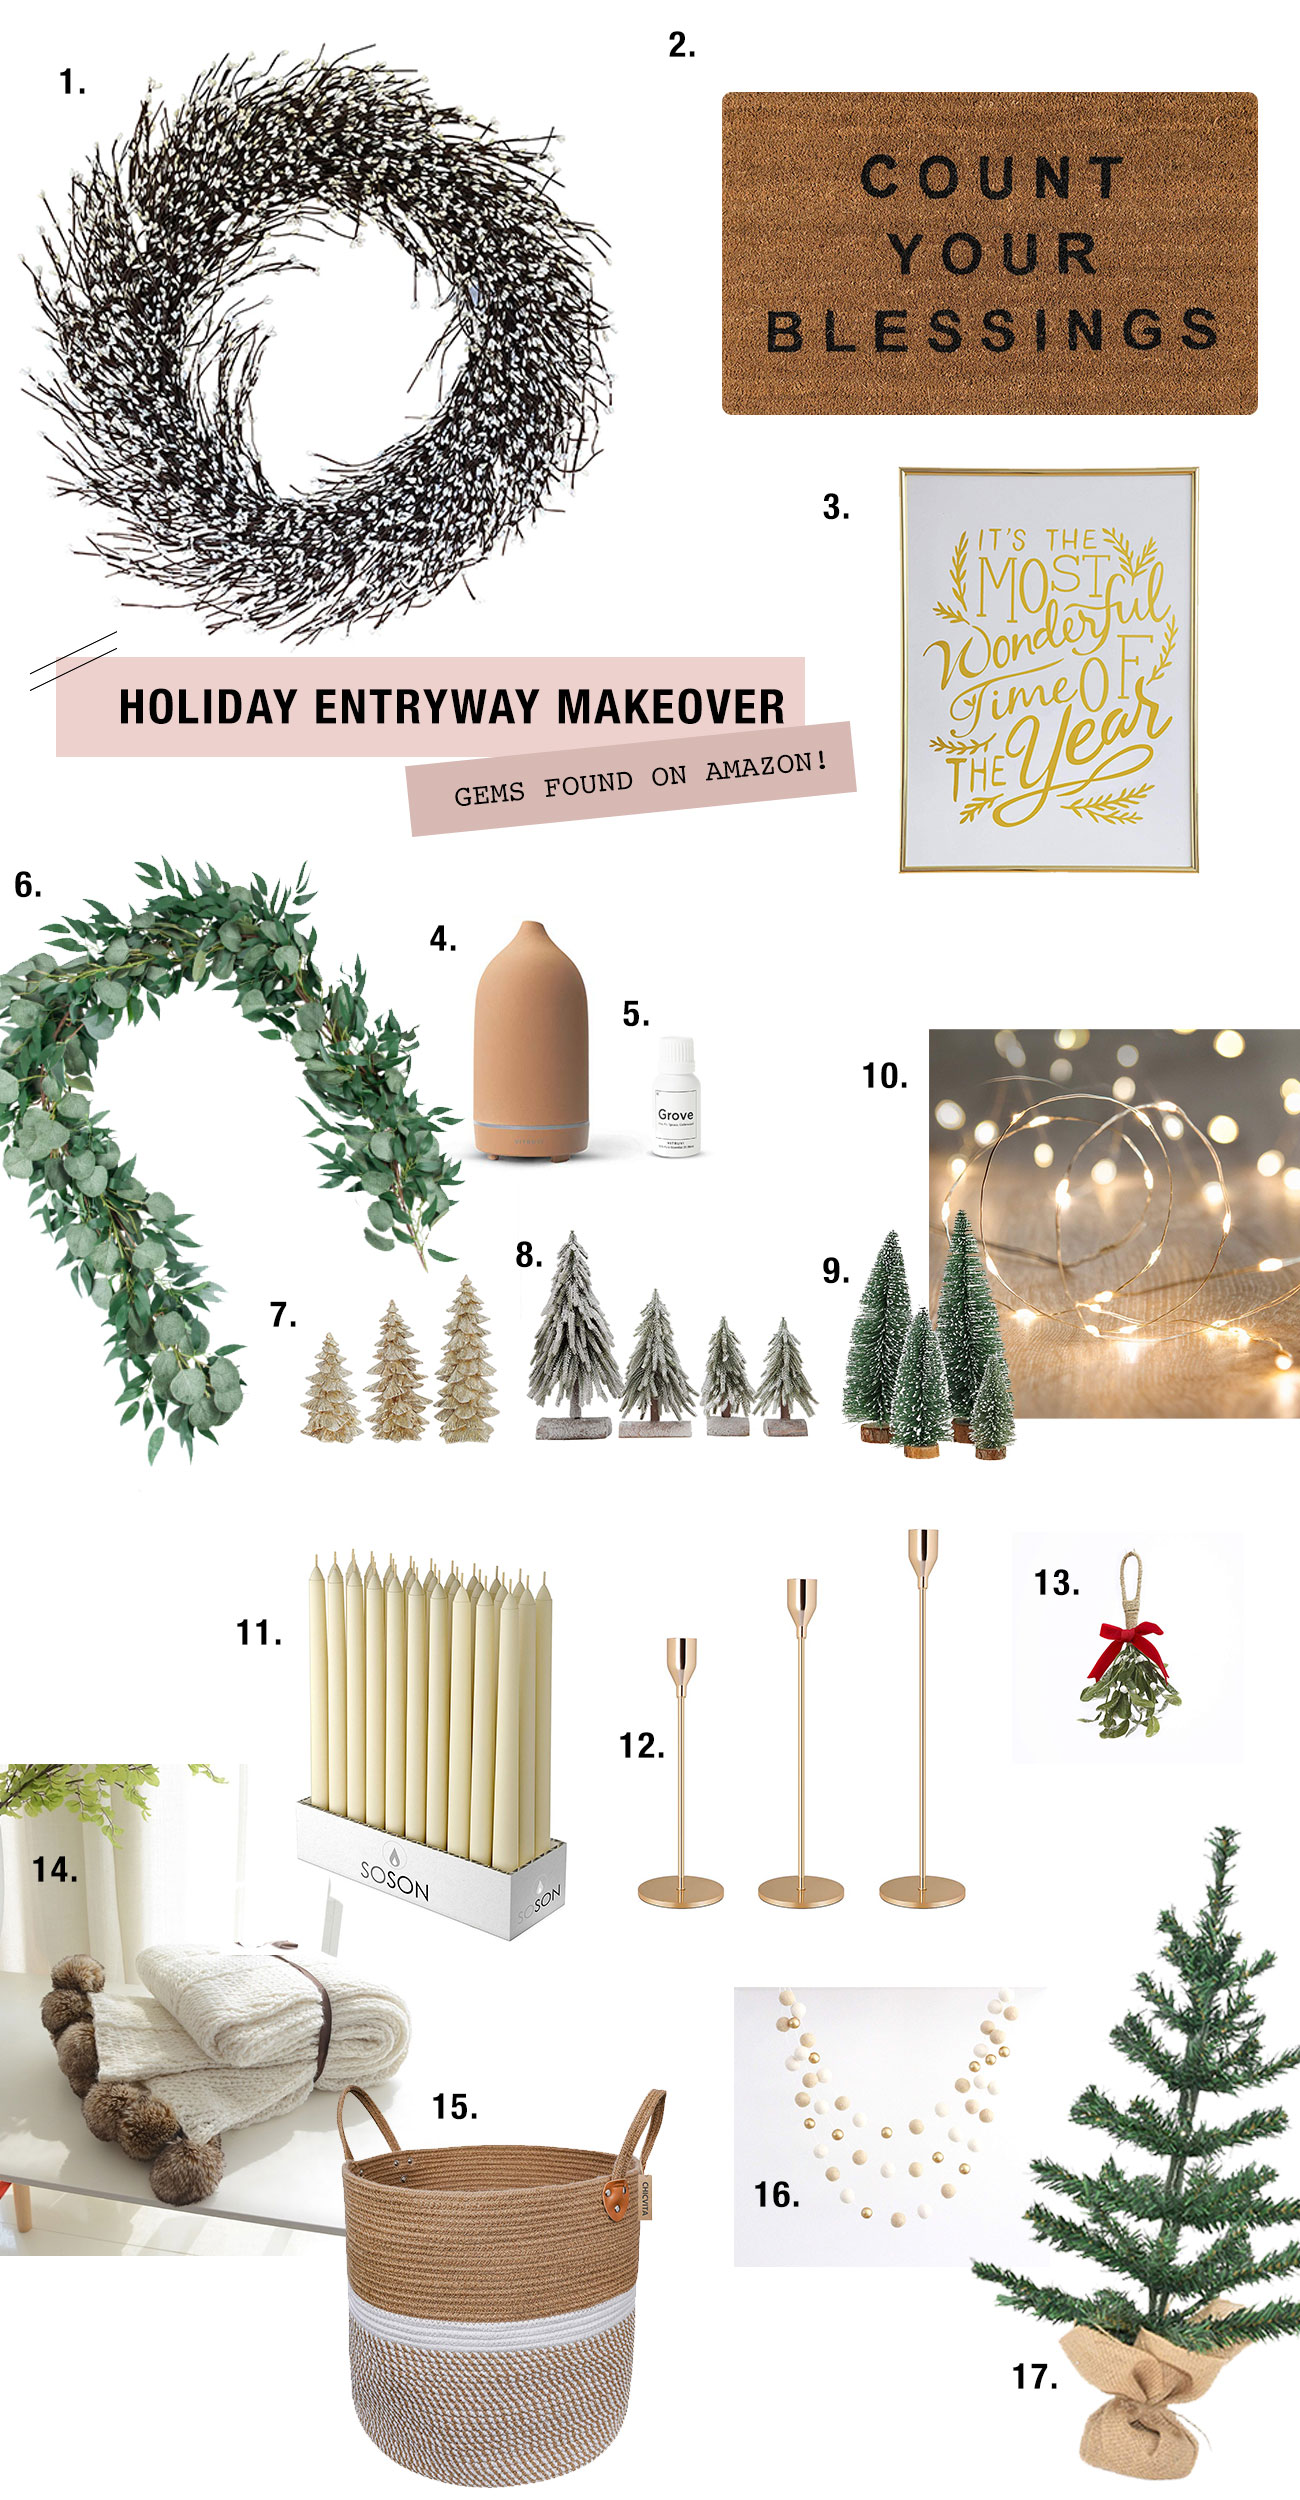 Decorate your entryway for the holidays with these absolute gems we found on Amazon!